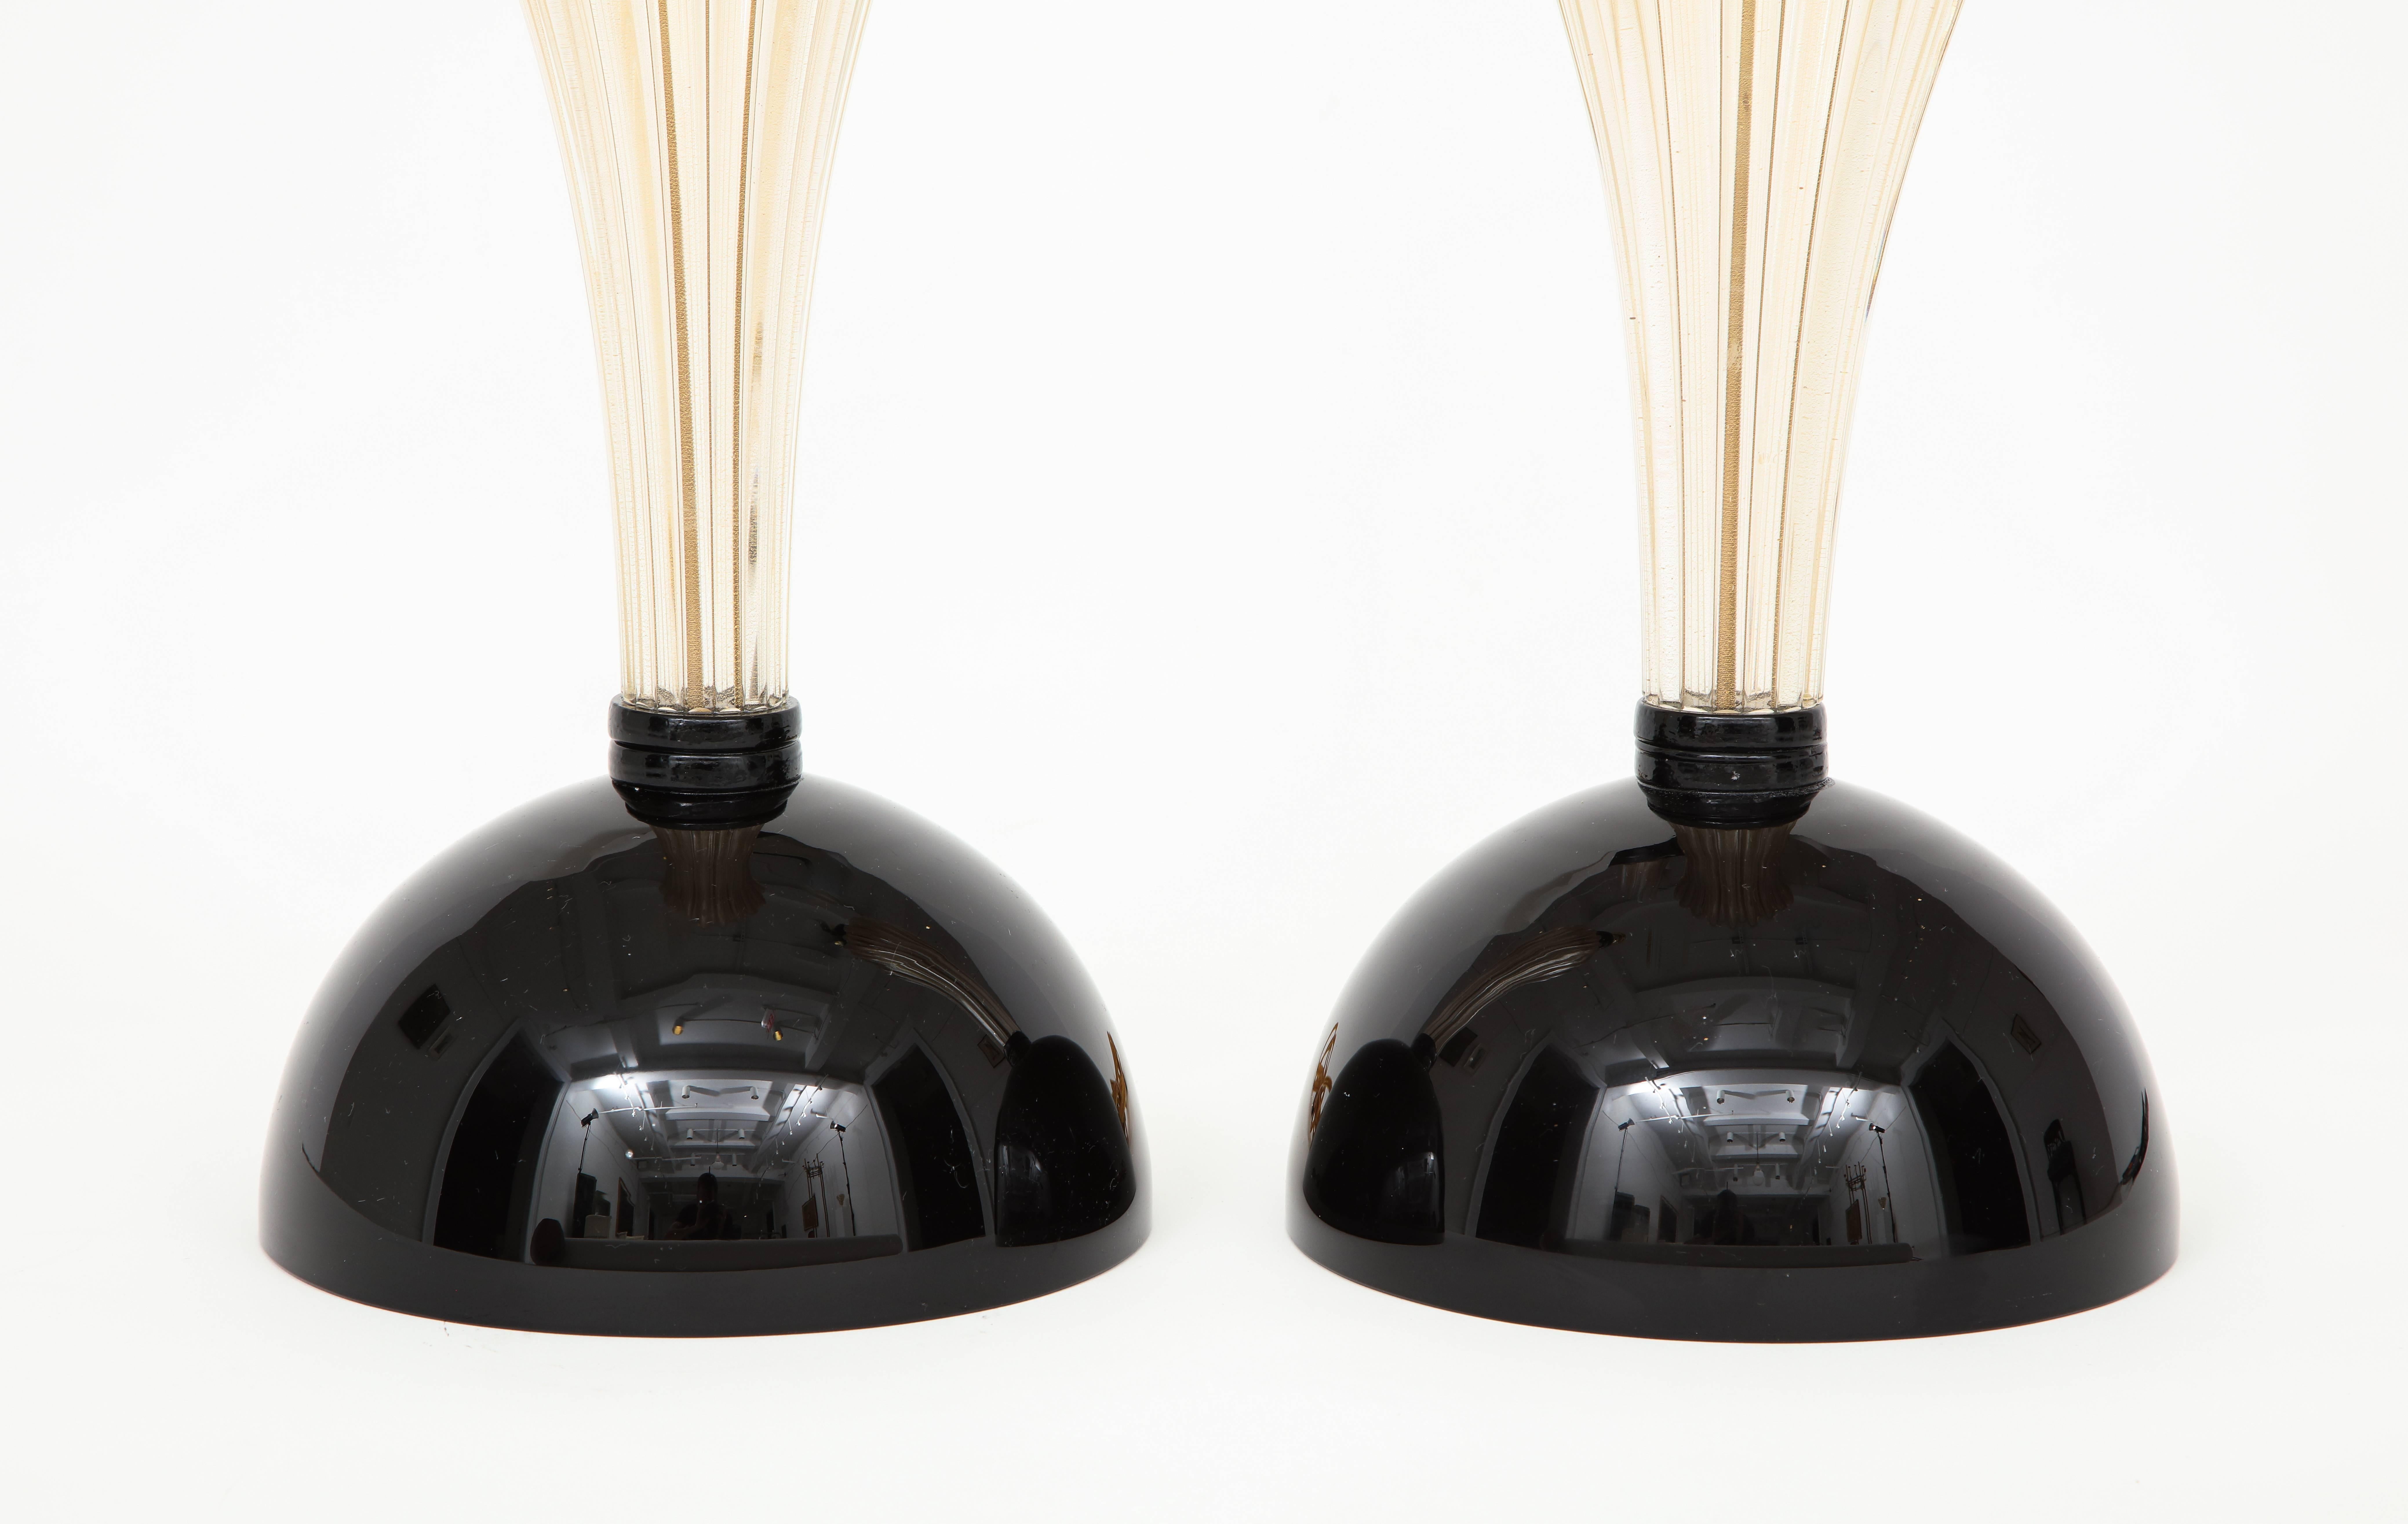 This pair of hand blown gold and black Murano glass lamps combine timeless Classic design with a modern twist. A clear Murano ridged glass center is infused with 23-karat gold flecks, giving it a shimmering jeweled look.
Two solid black Murano glass